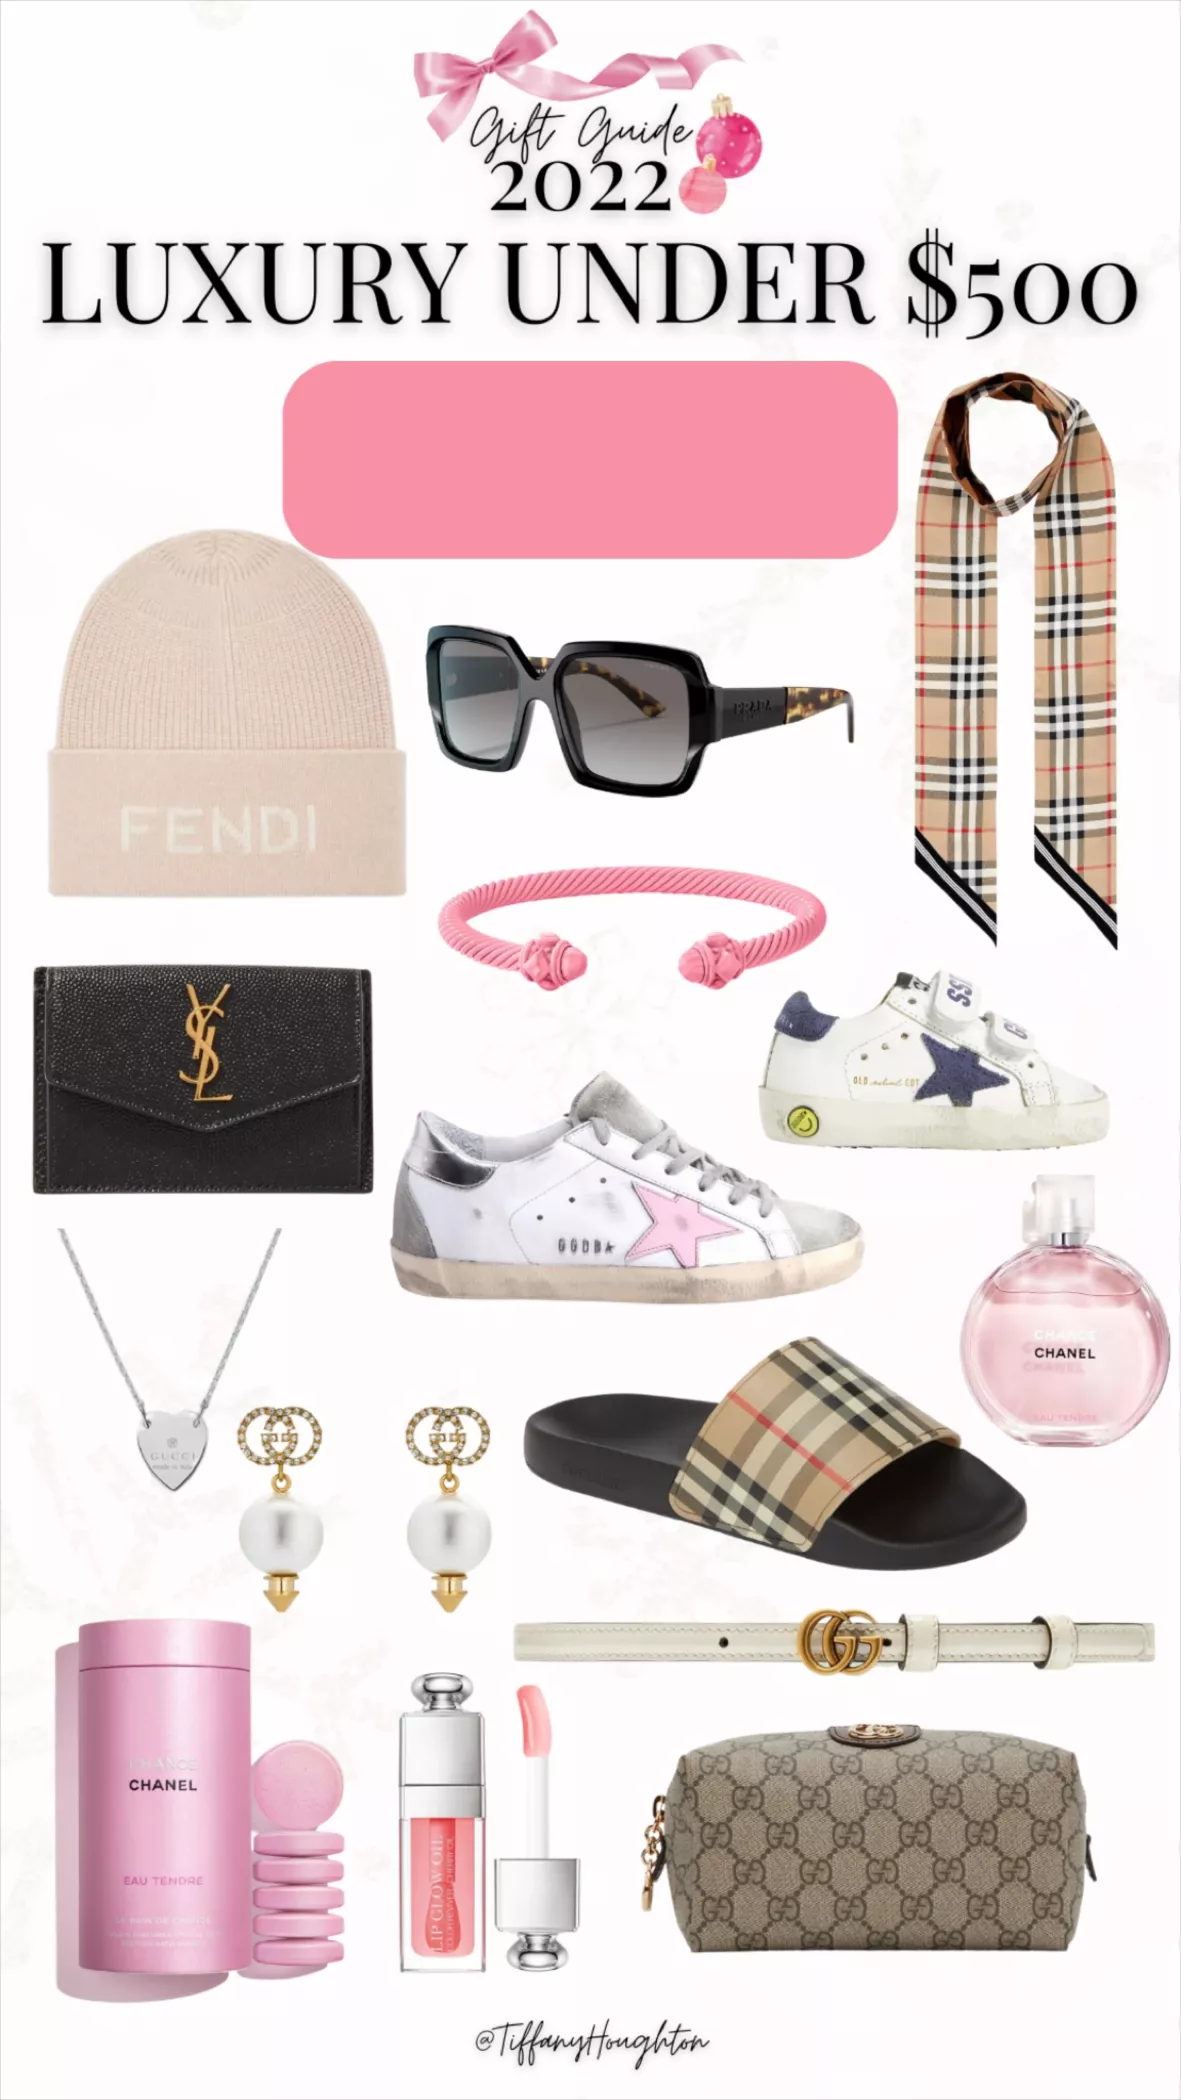 20 Gifts for a Fashion Girl Who Doesn't Like Makeup, by Veronika Lipar